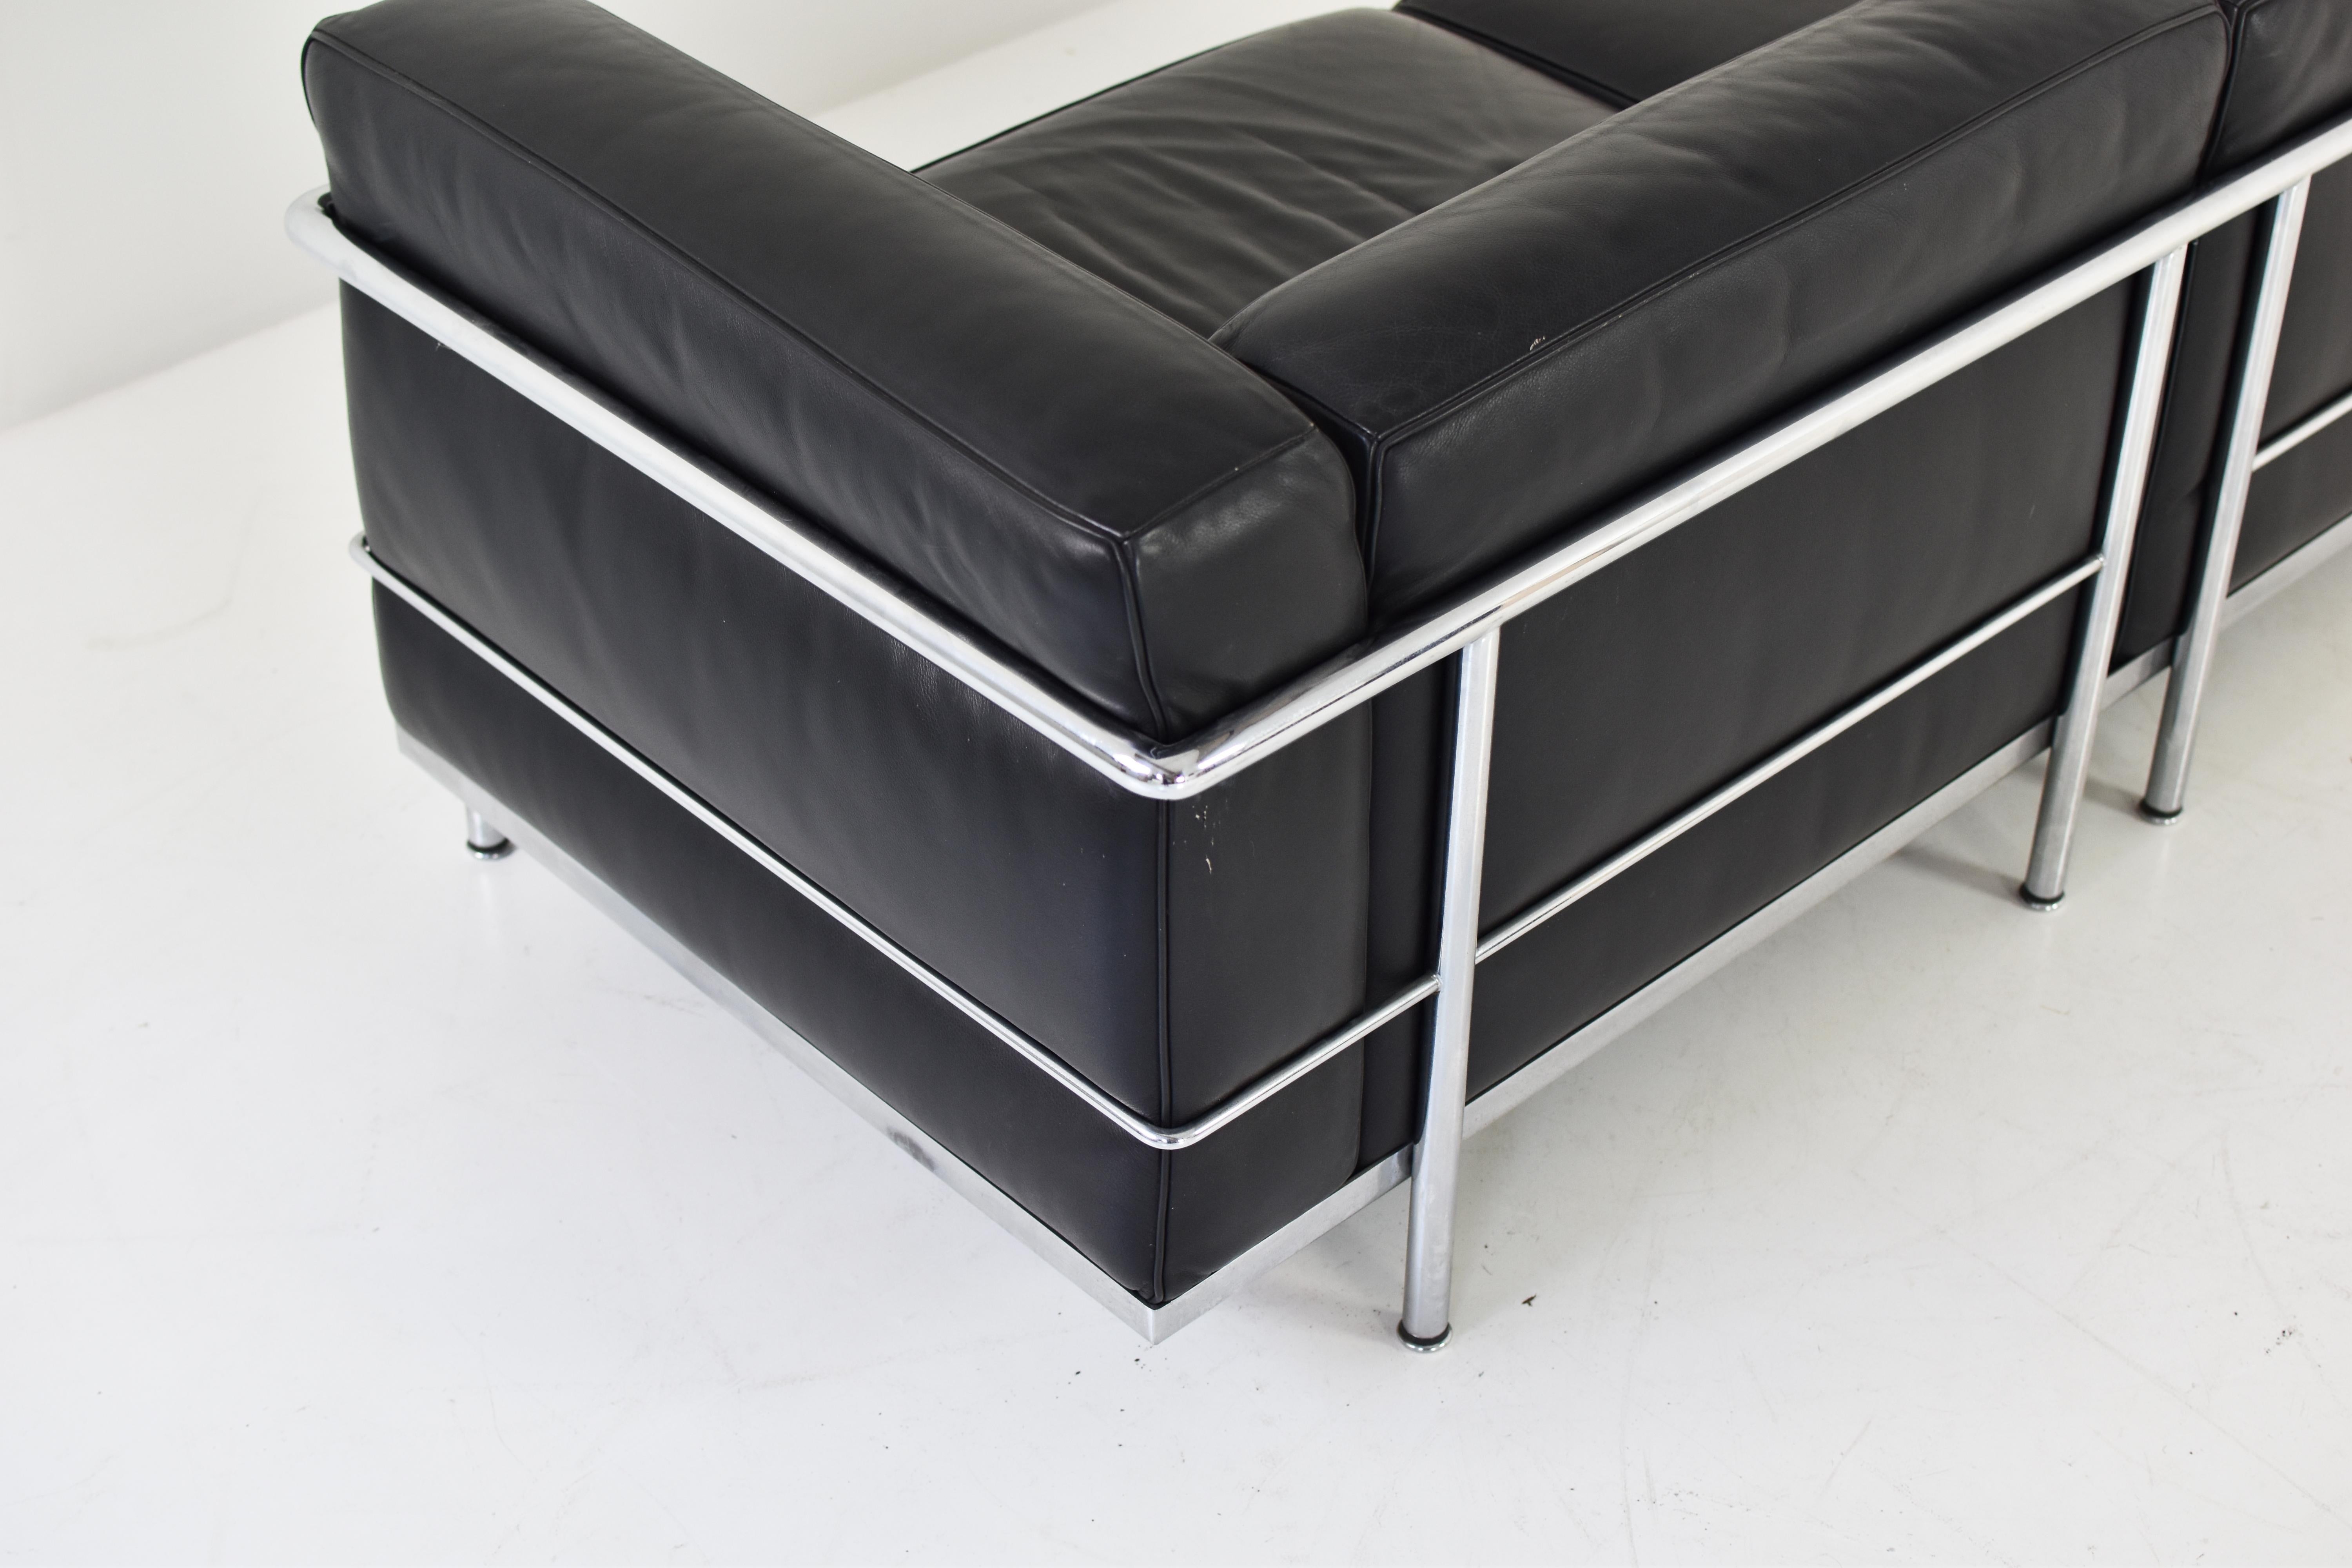 Leather ‘Lc3’ Sofa by Le Corbusier, Pierre Jeanneret and Charlotte Perriand